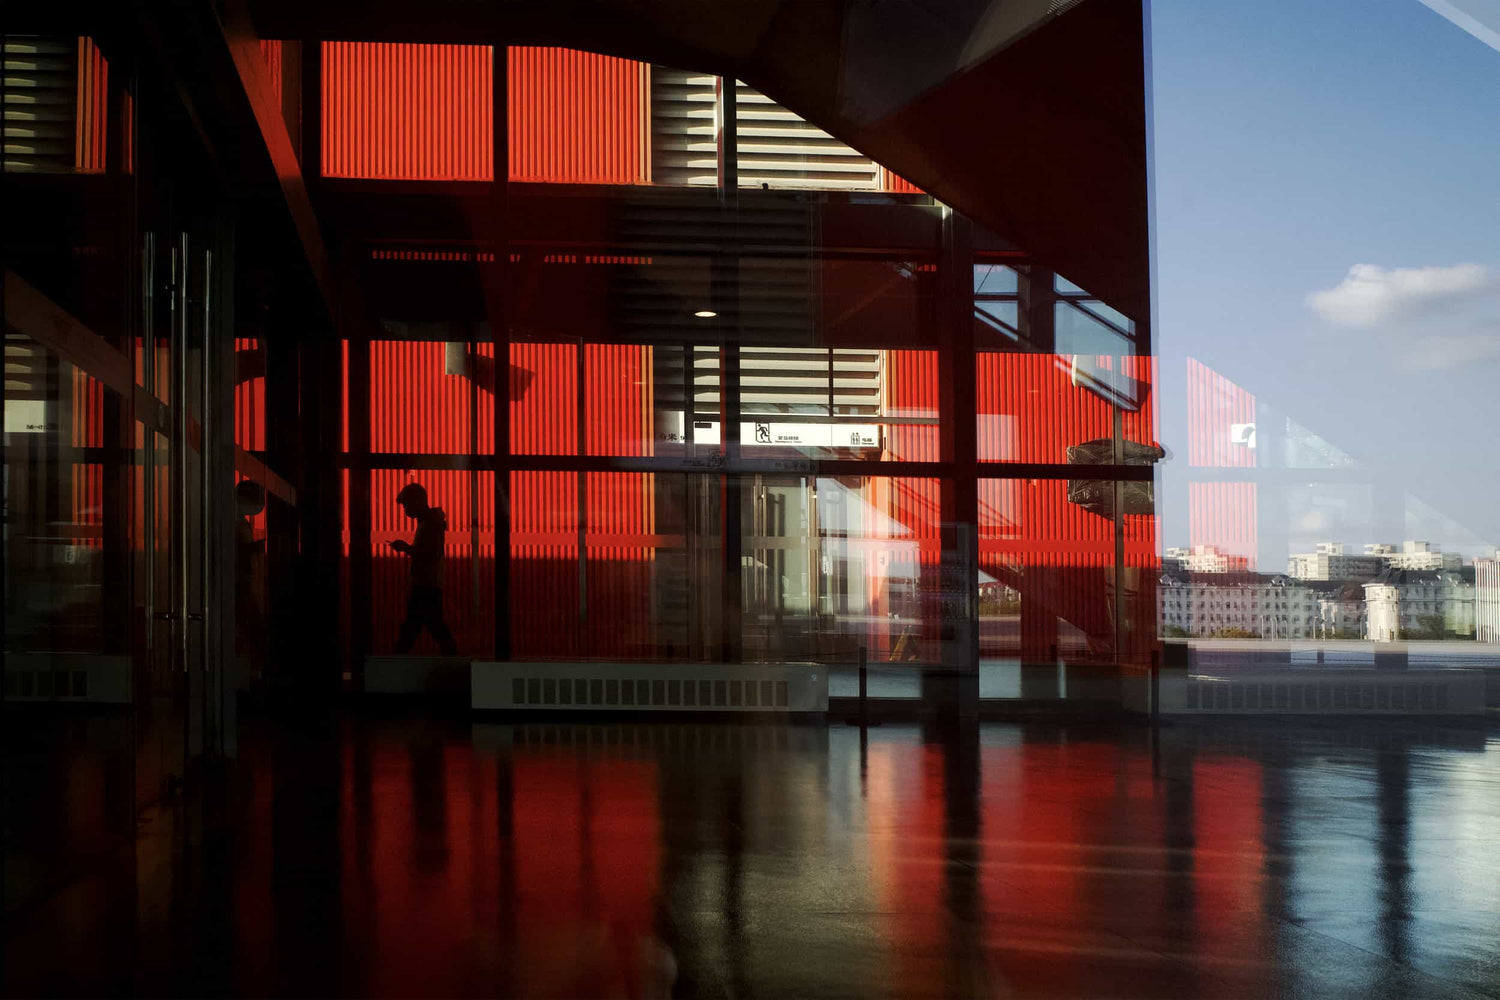 The artpiece 'Reflection' by Michael Cai which shows a black and red image of a building with a glass wall, which reflects the building structure.